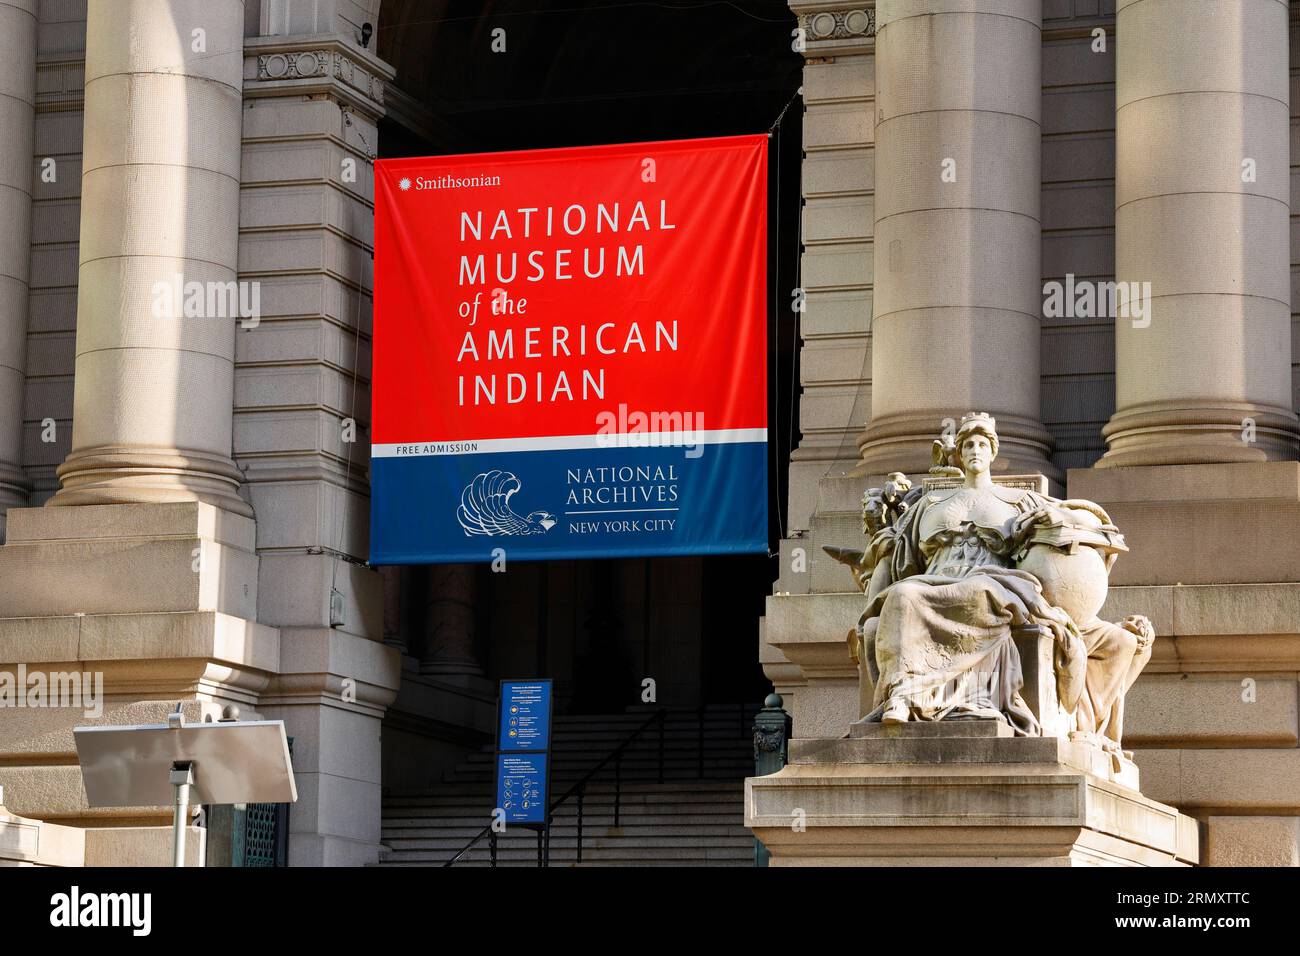 National Museum of the American Indian & National Archives, 1 Bowling Green, New York. Un museo Smithsonian presso la Alexander Hamilton US Custom House Foto Stock